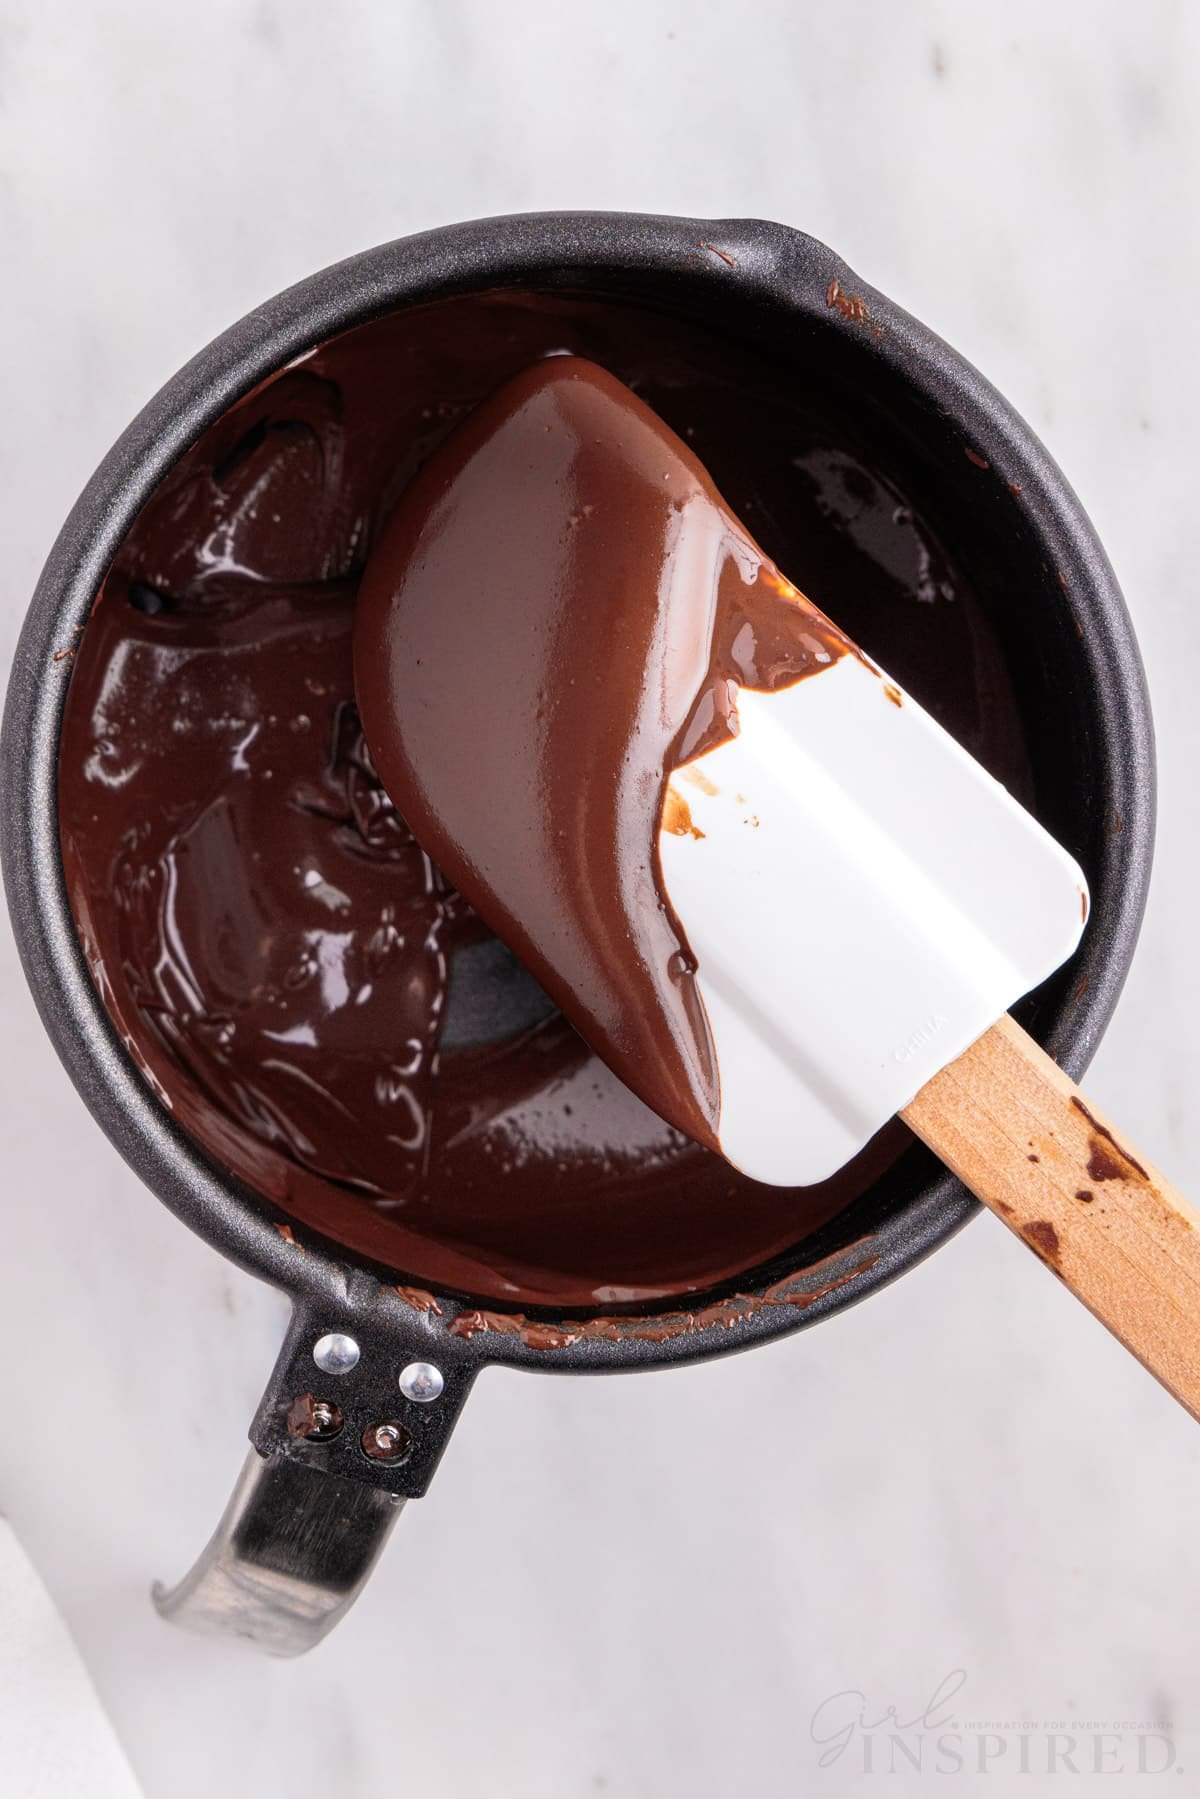 Melted chocolate in a pan with rubber spatula, on a marble countertop.